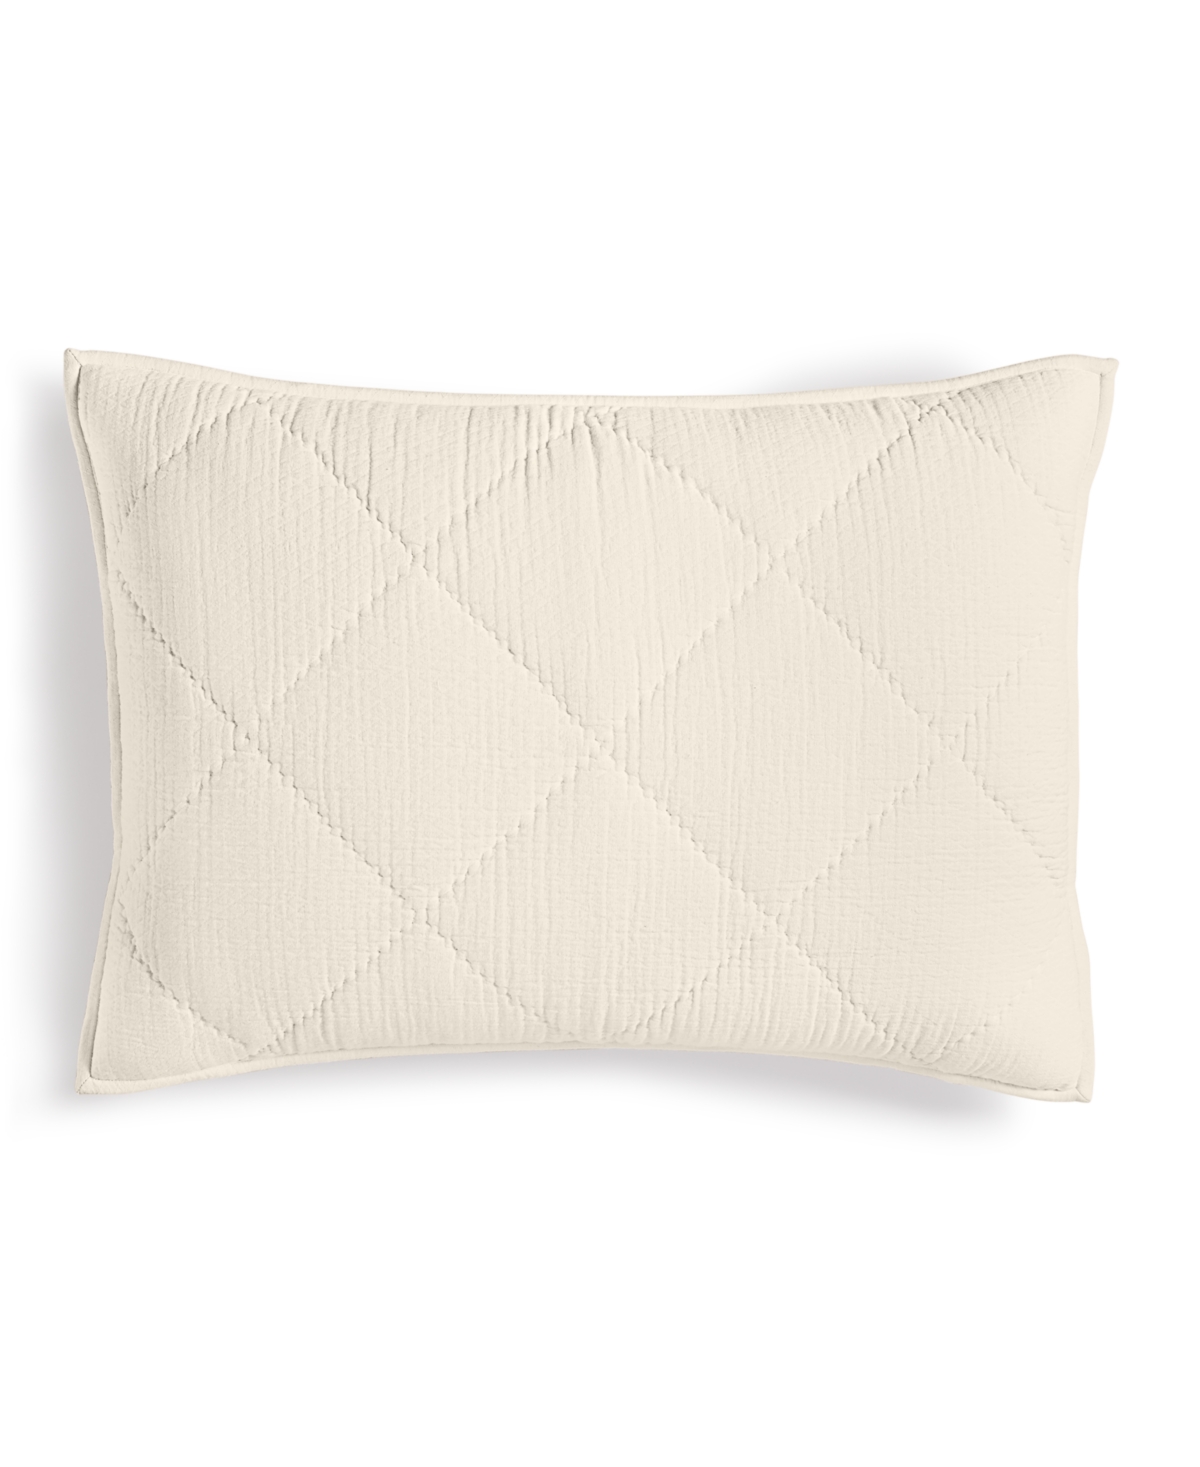 Closeout! Hotel Collection Dobby Diamond Quilted Sham, King, Created for Macy's - Natural